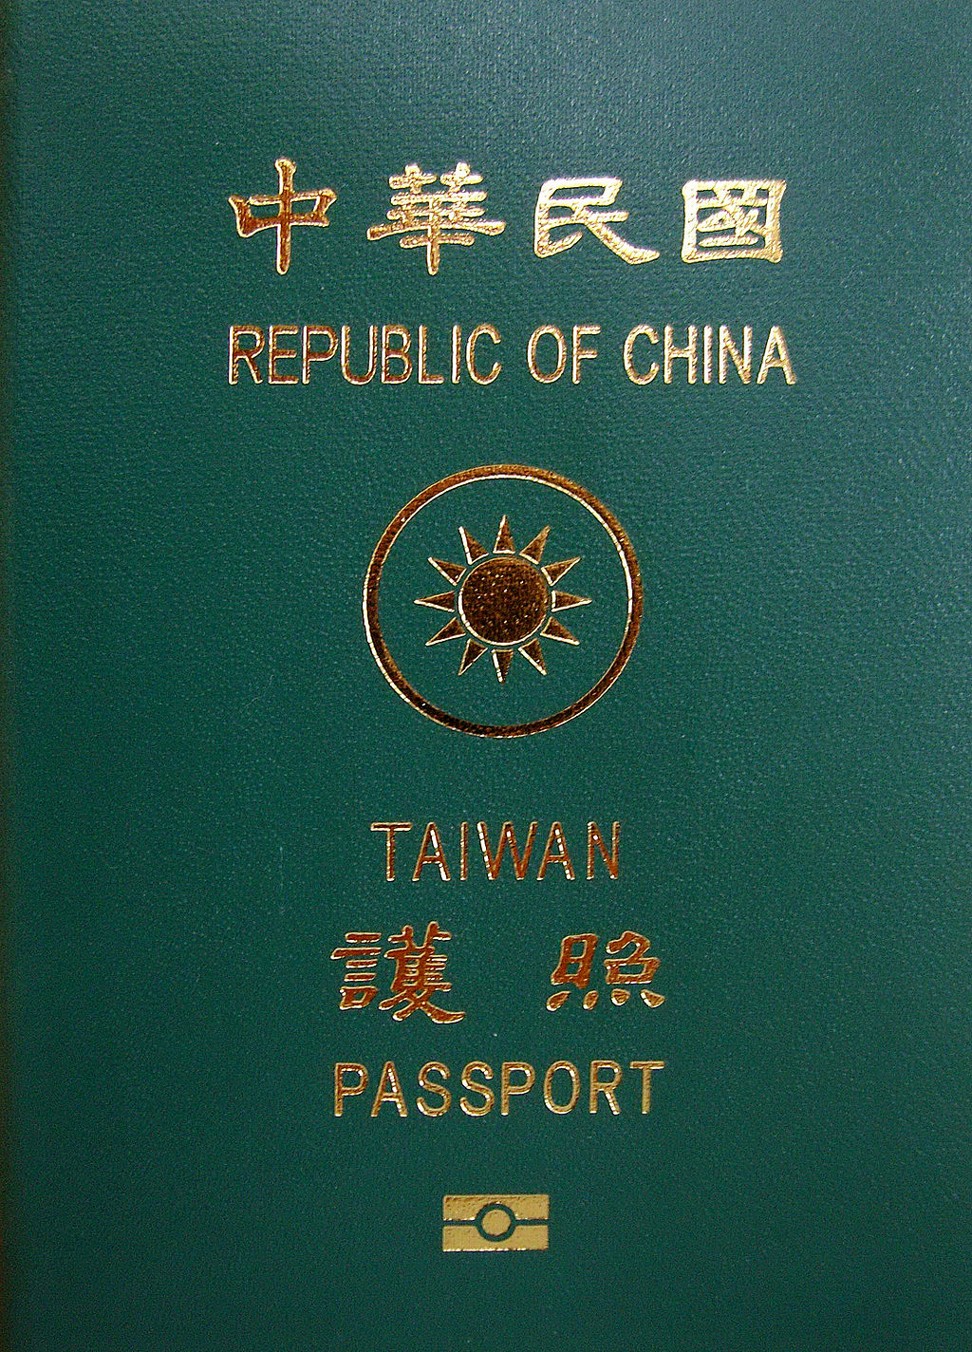 The island’s passports include both Taiwan and its official name the Republic of China. Photo: Wikipedia